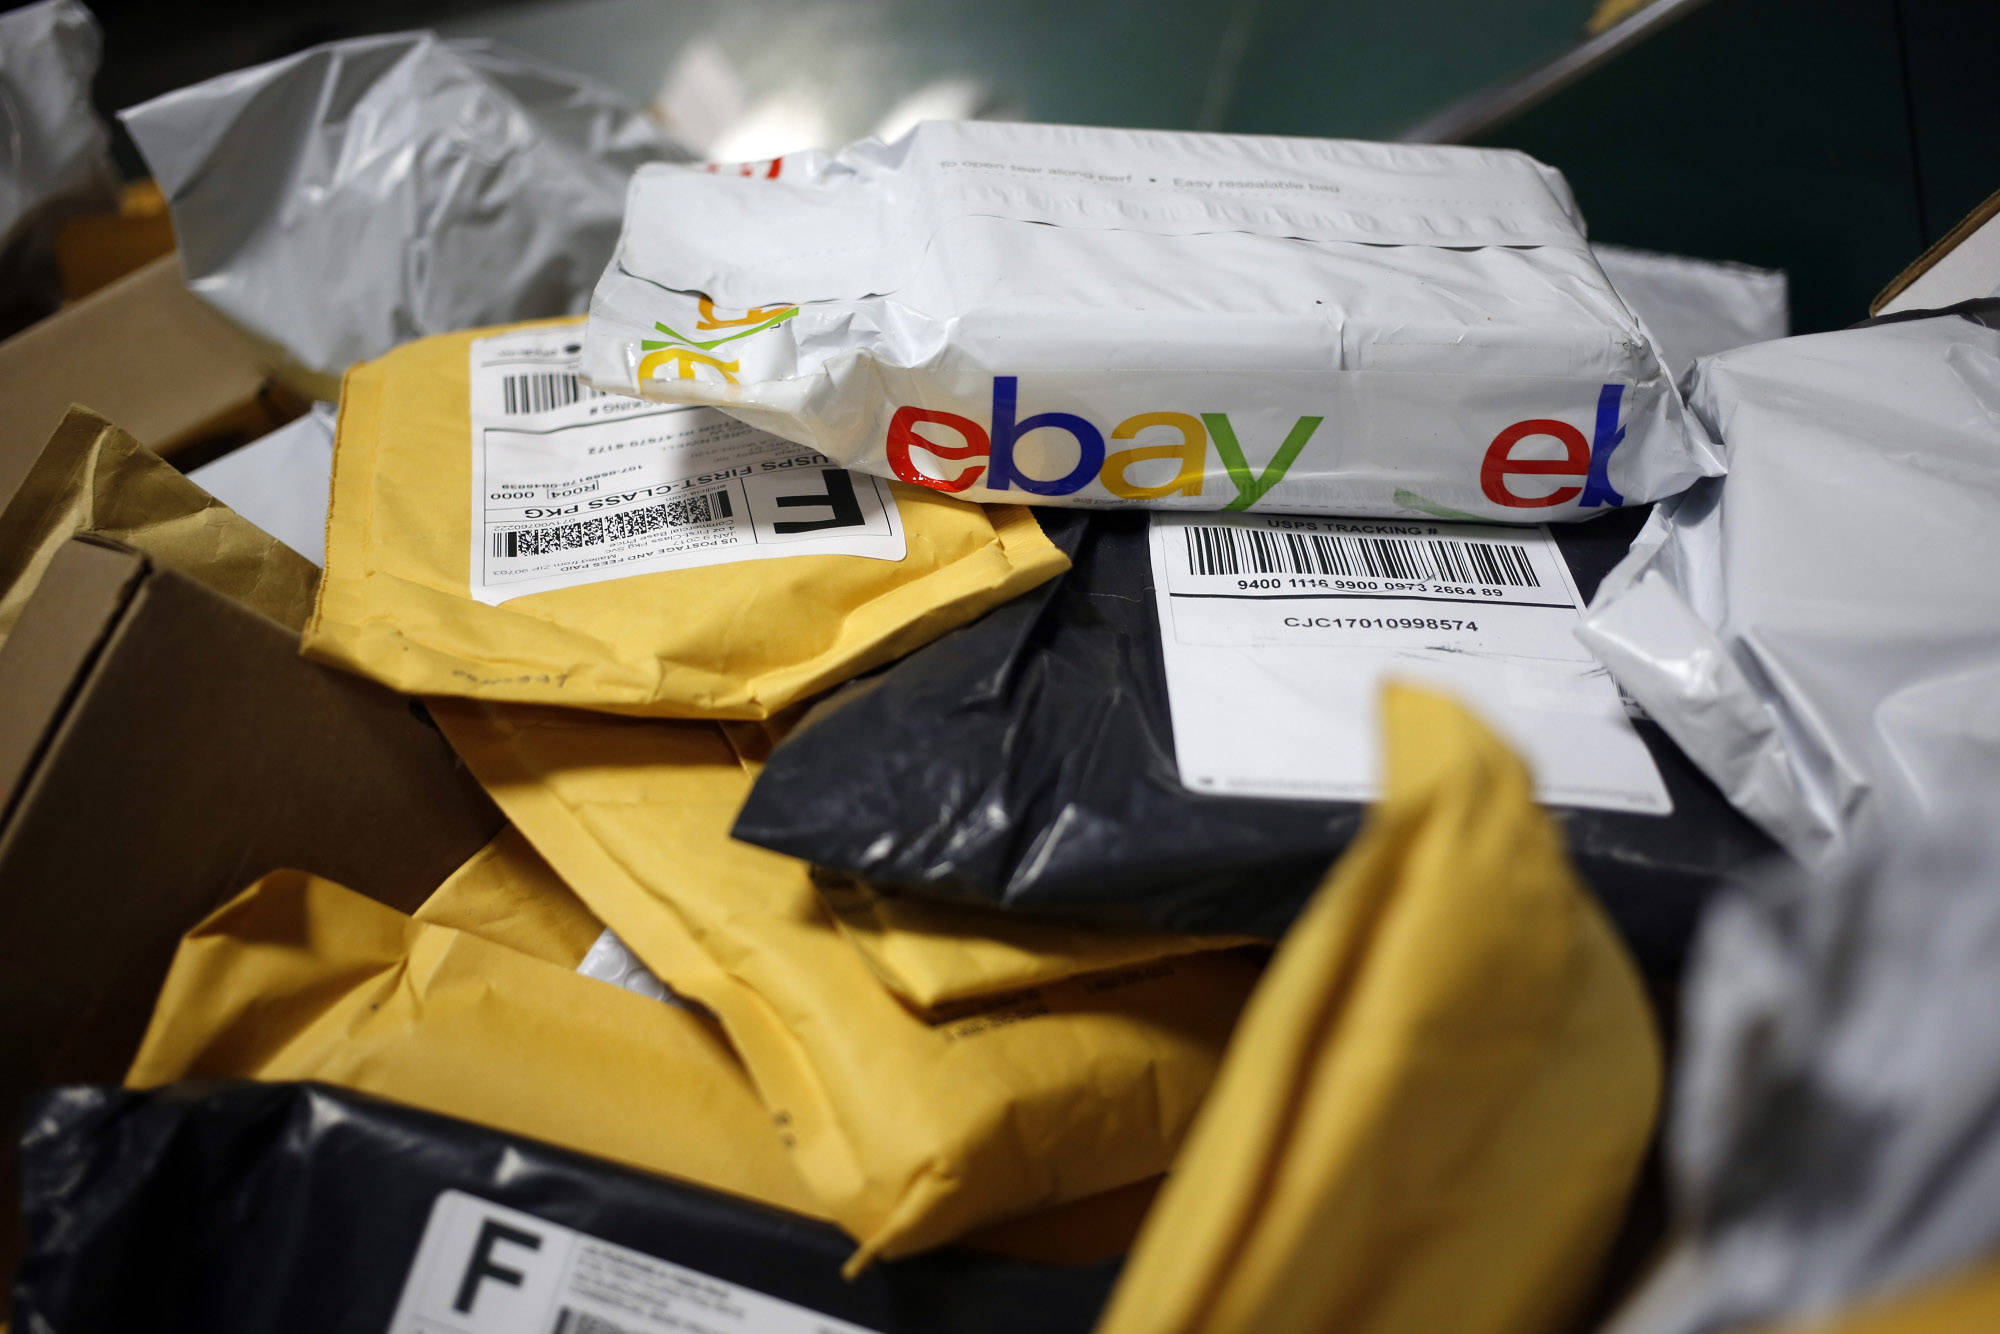 A parcel in eBay Inc. packaging is seen on a conveyor belt with other small parcels at the United States Postal Service sorting center in Louisville, Kentucky, on Jan. 13, 2017. MUST CREDIT: Bloomberg photo by Luke Sharrett.